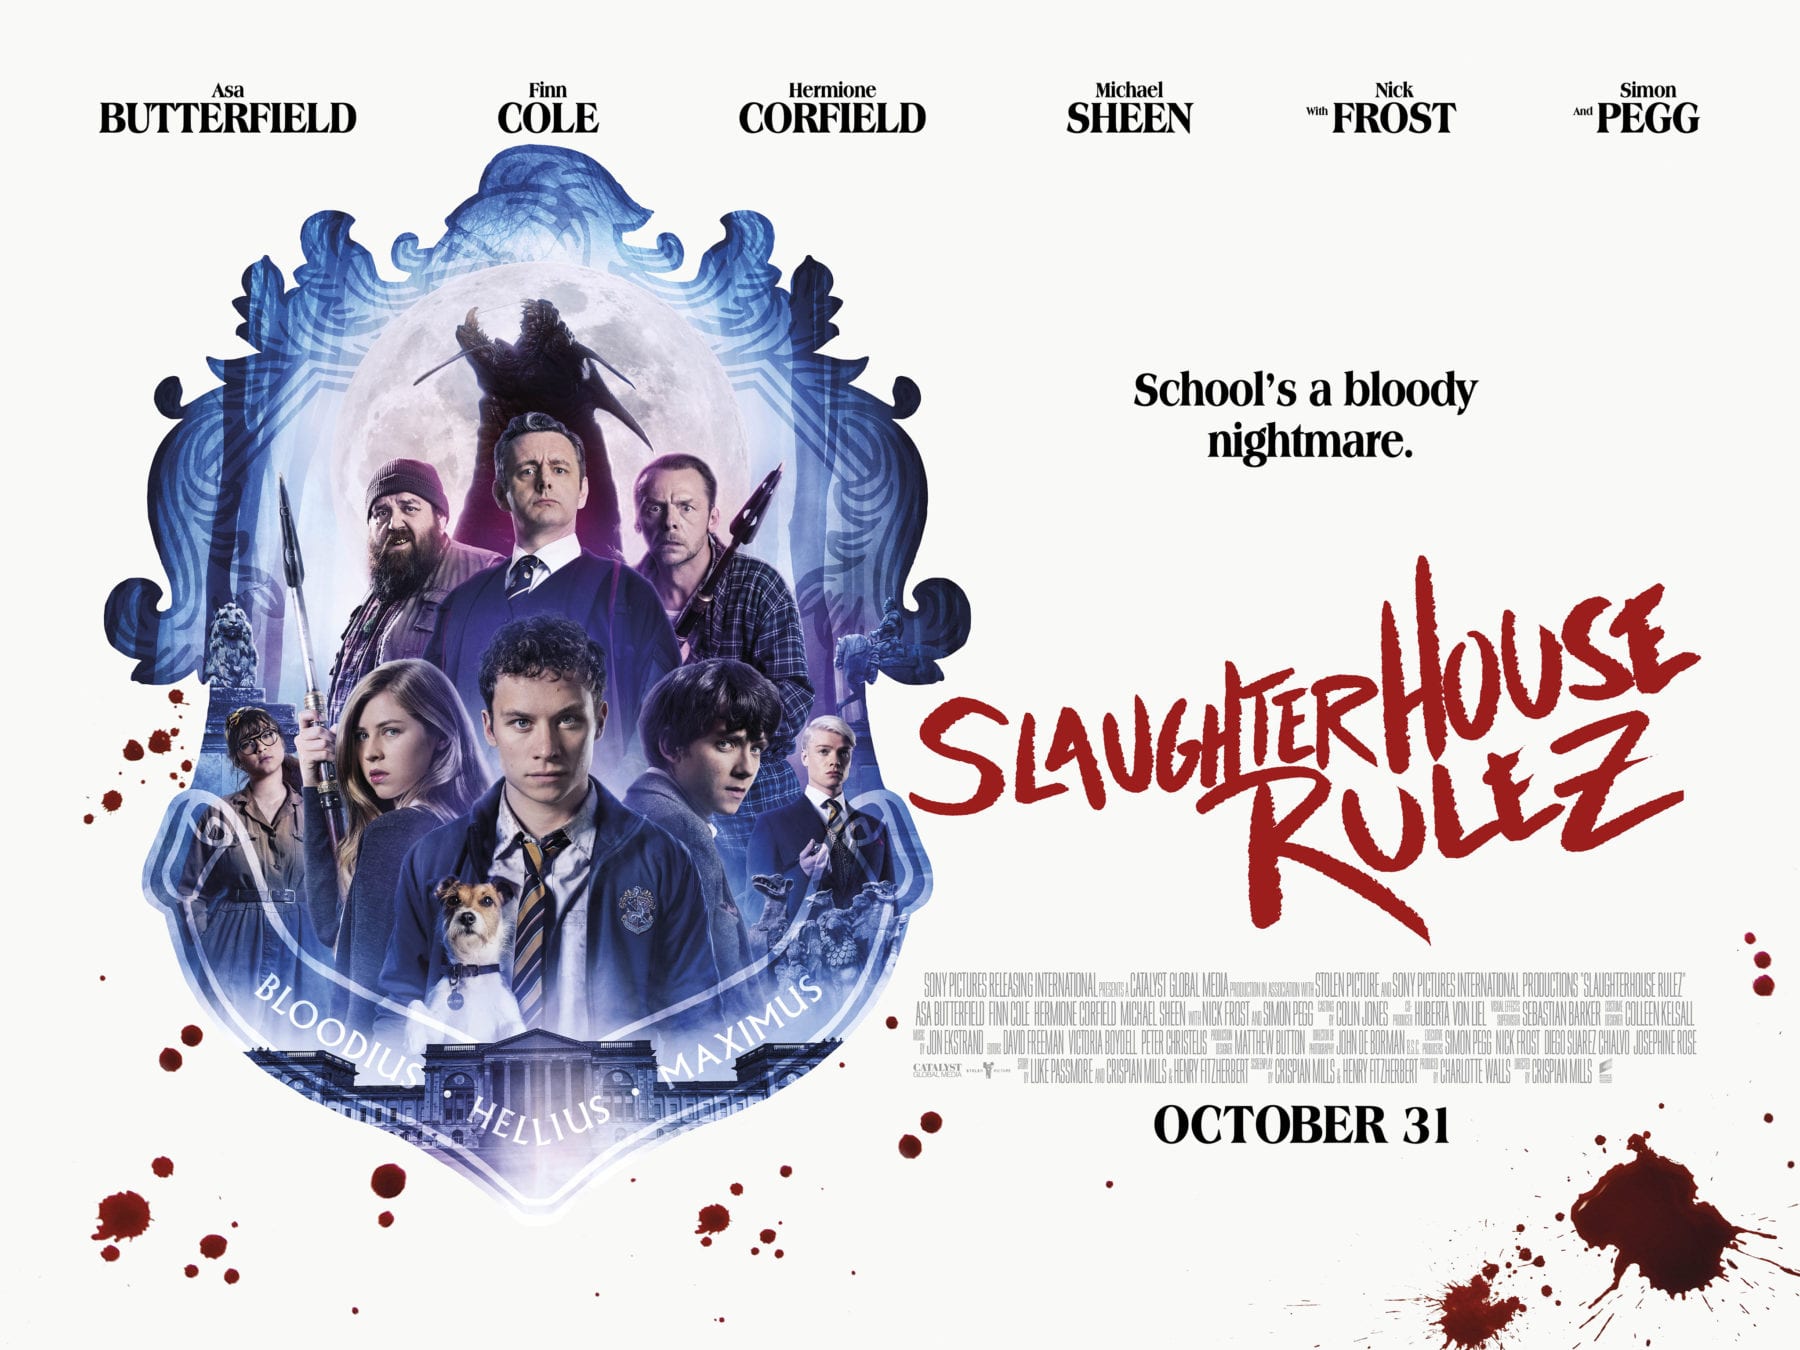 Meet the cast of Slaughterhouse Rulez in new promos for 